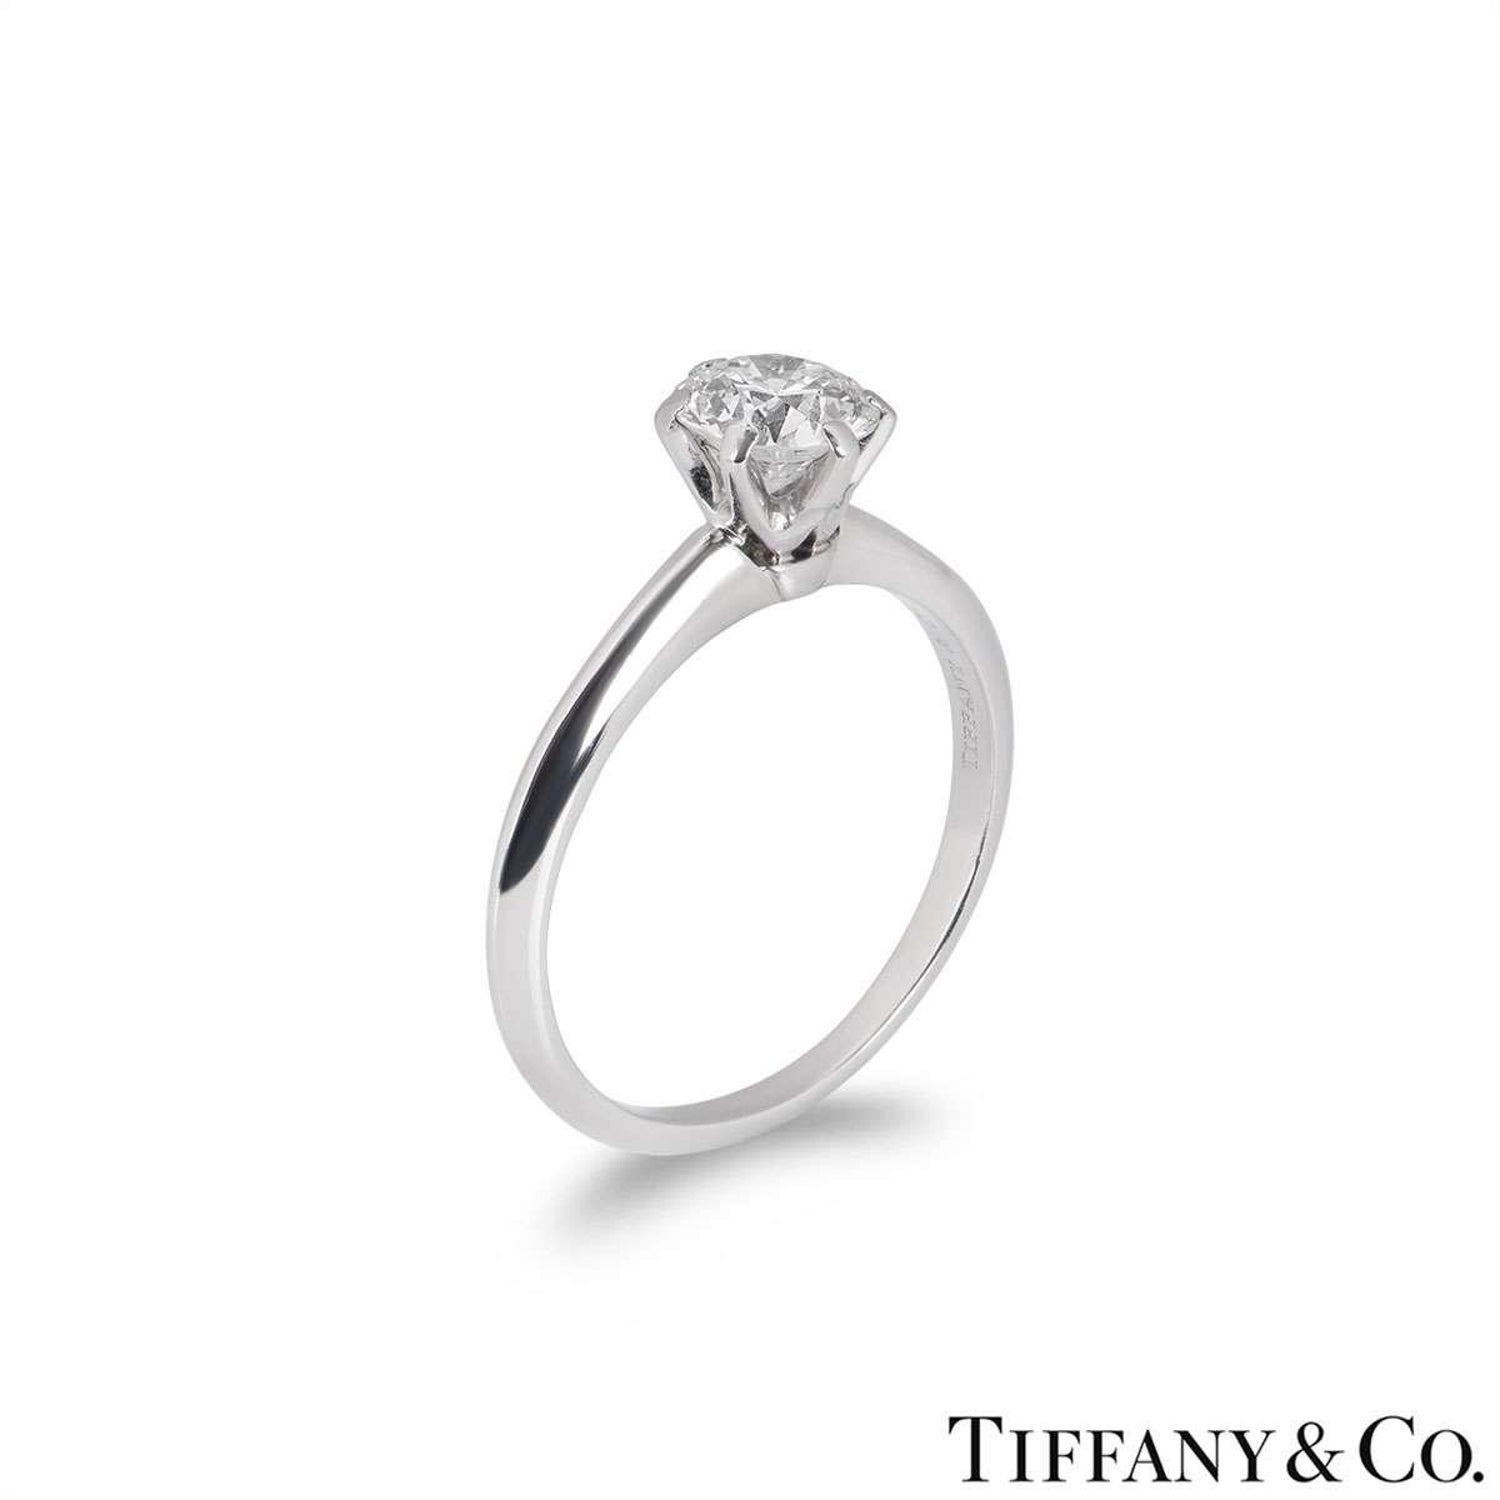 Tiffany and Co. Round Brilliant Diamond Engagement Ring 1.02 Carat GIA  Certified at 1stDibs